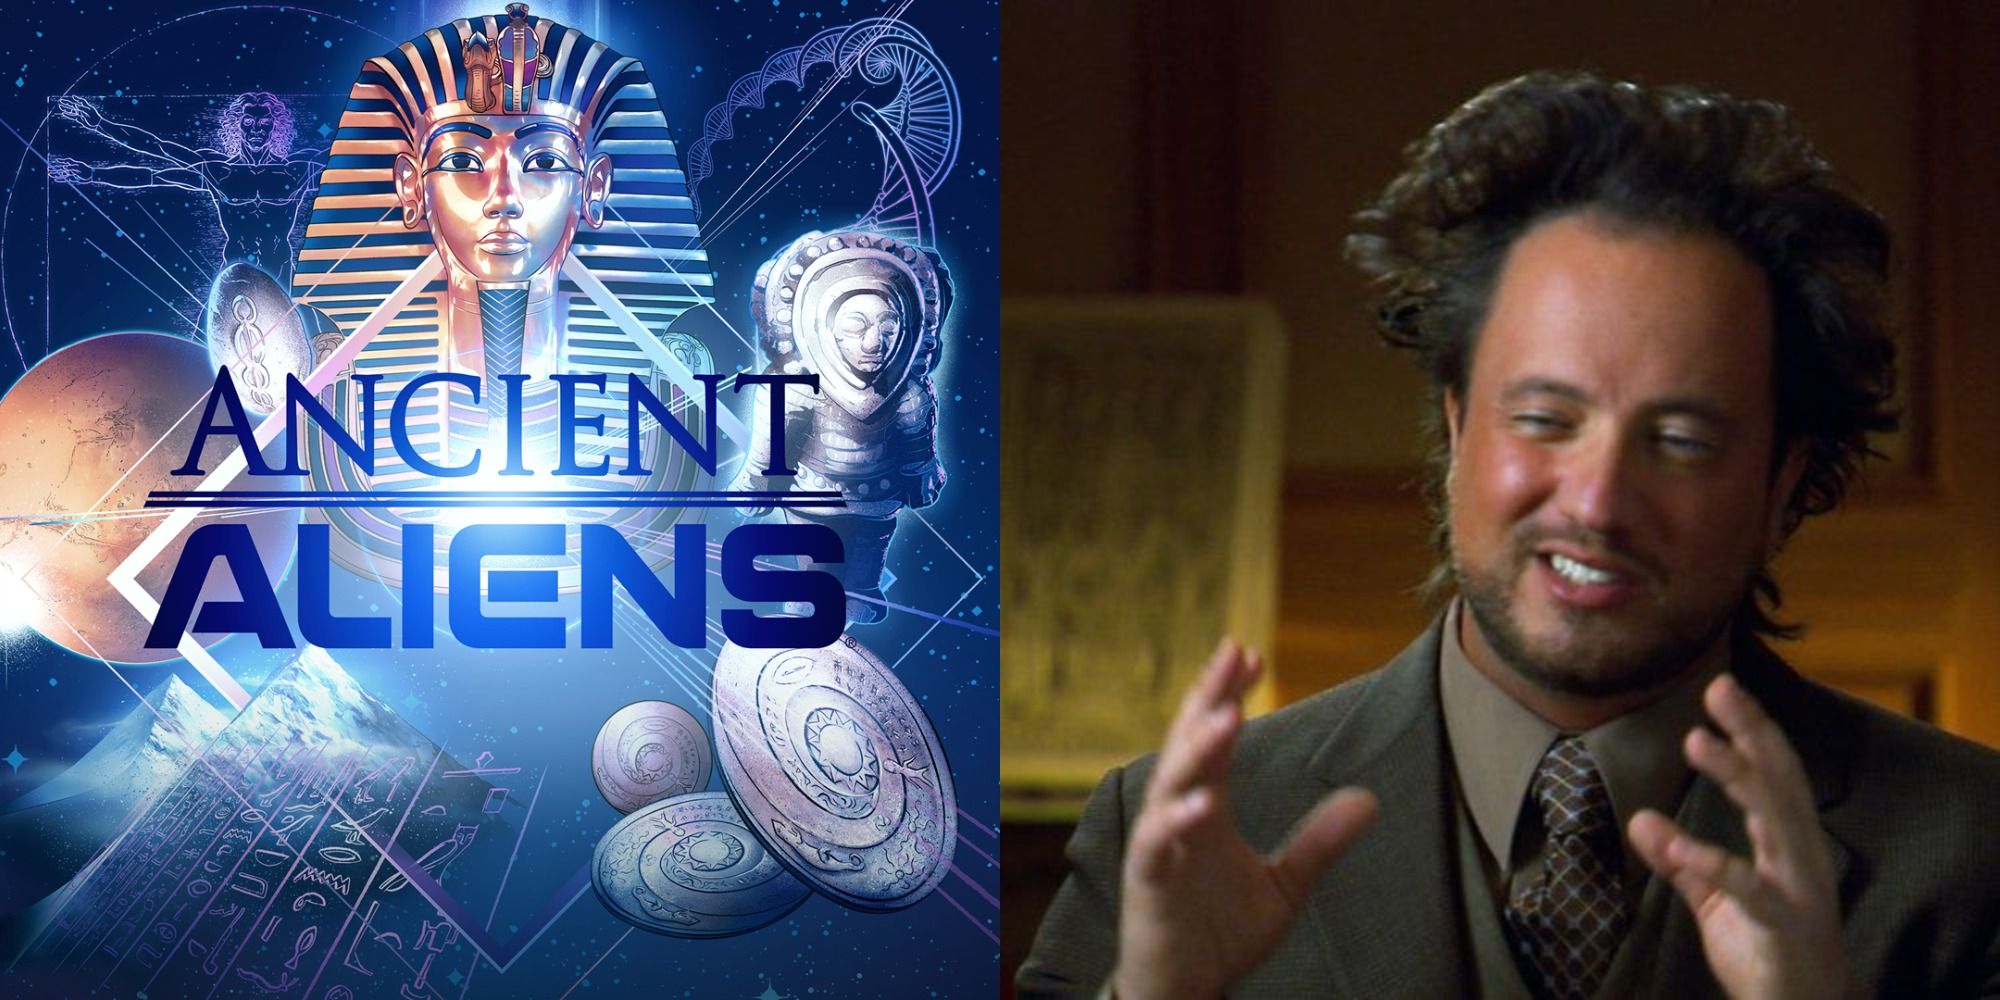 Split image showing the poster for Ancient Alies and the Alien meme guy